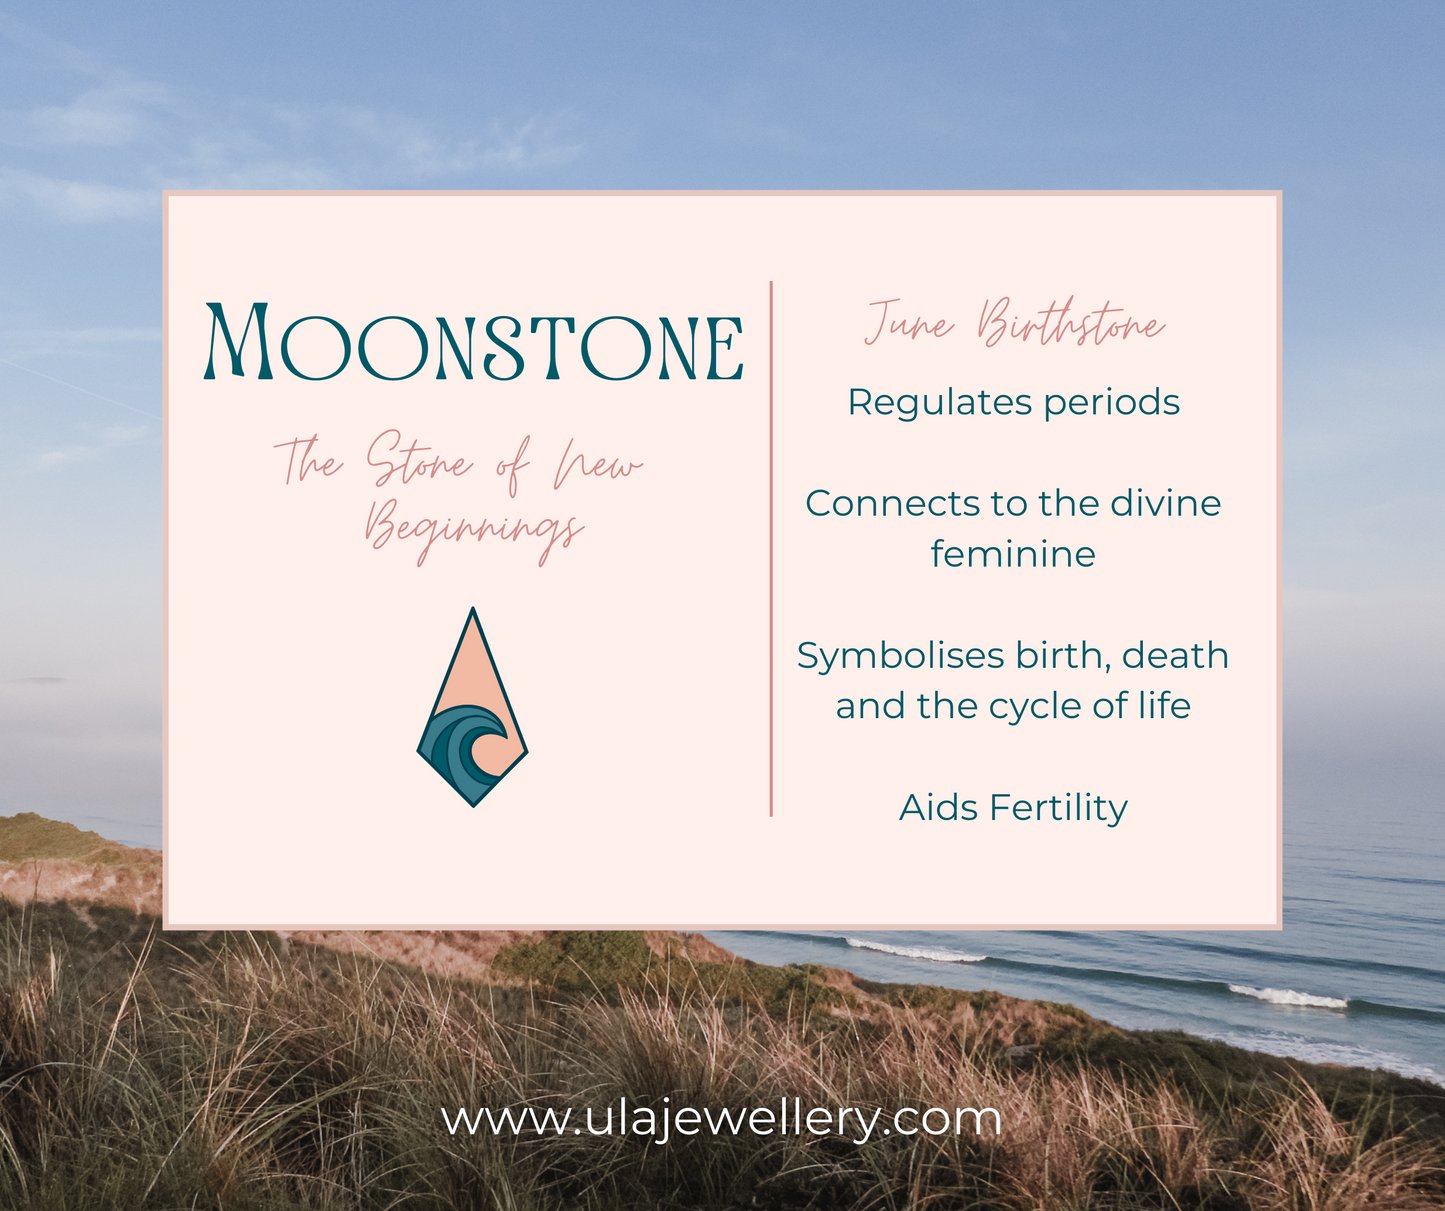 infographic by ula jewellery for moonstone crystal